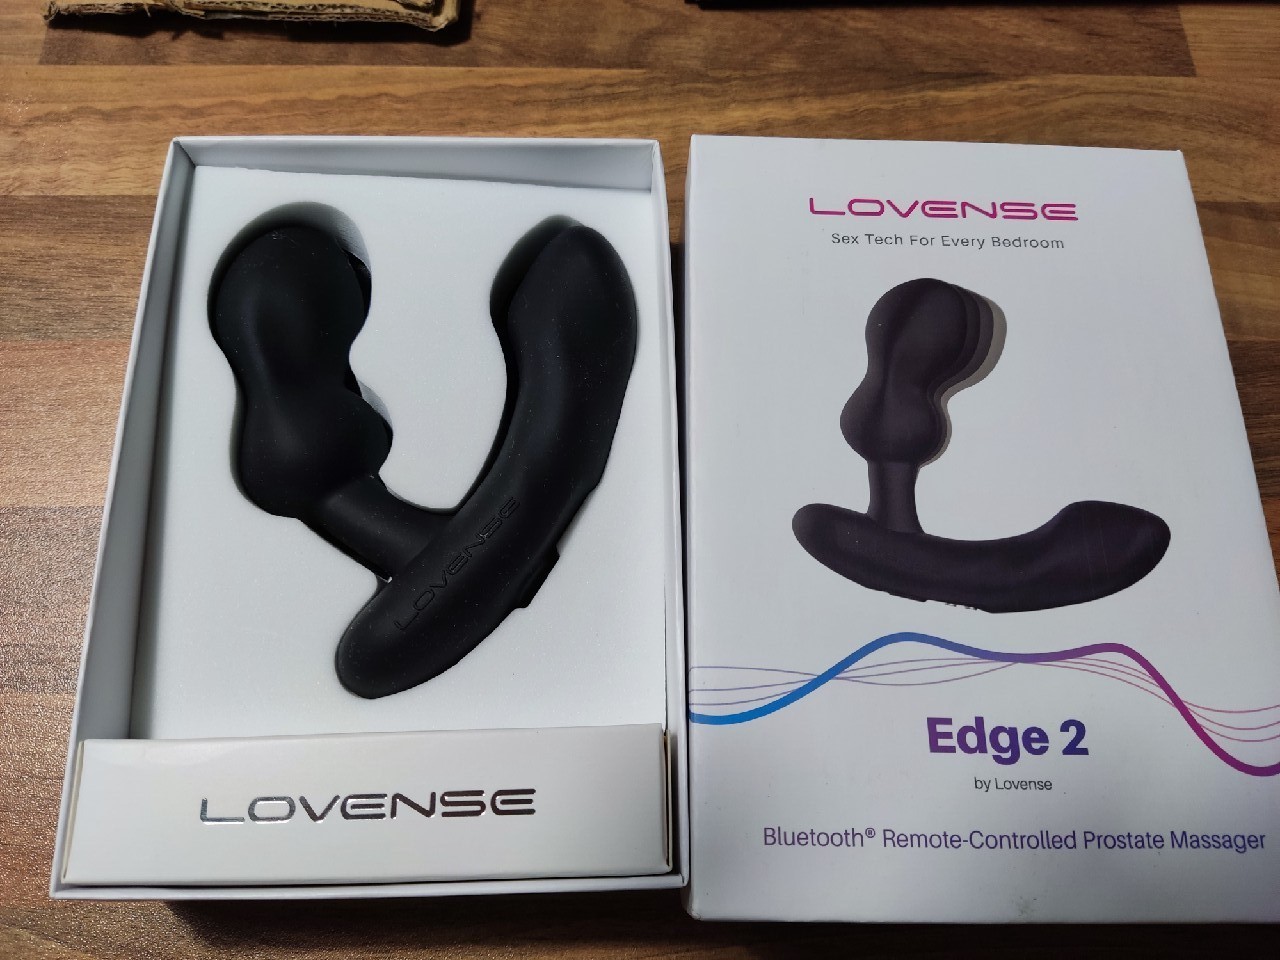 Lovense Edge 2 Review: Is this Prostate Massager Worth Buying?